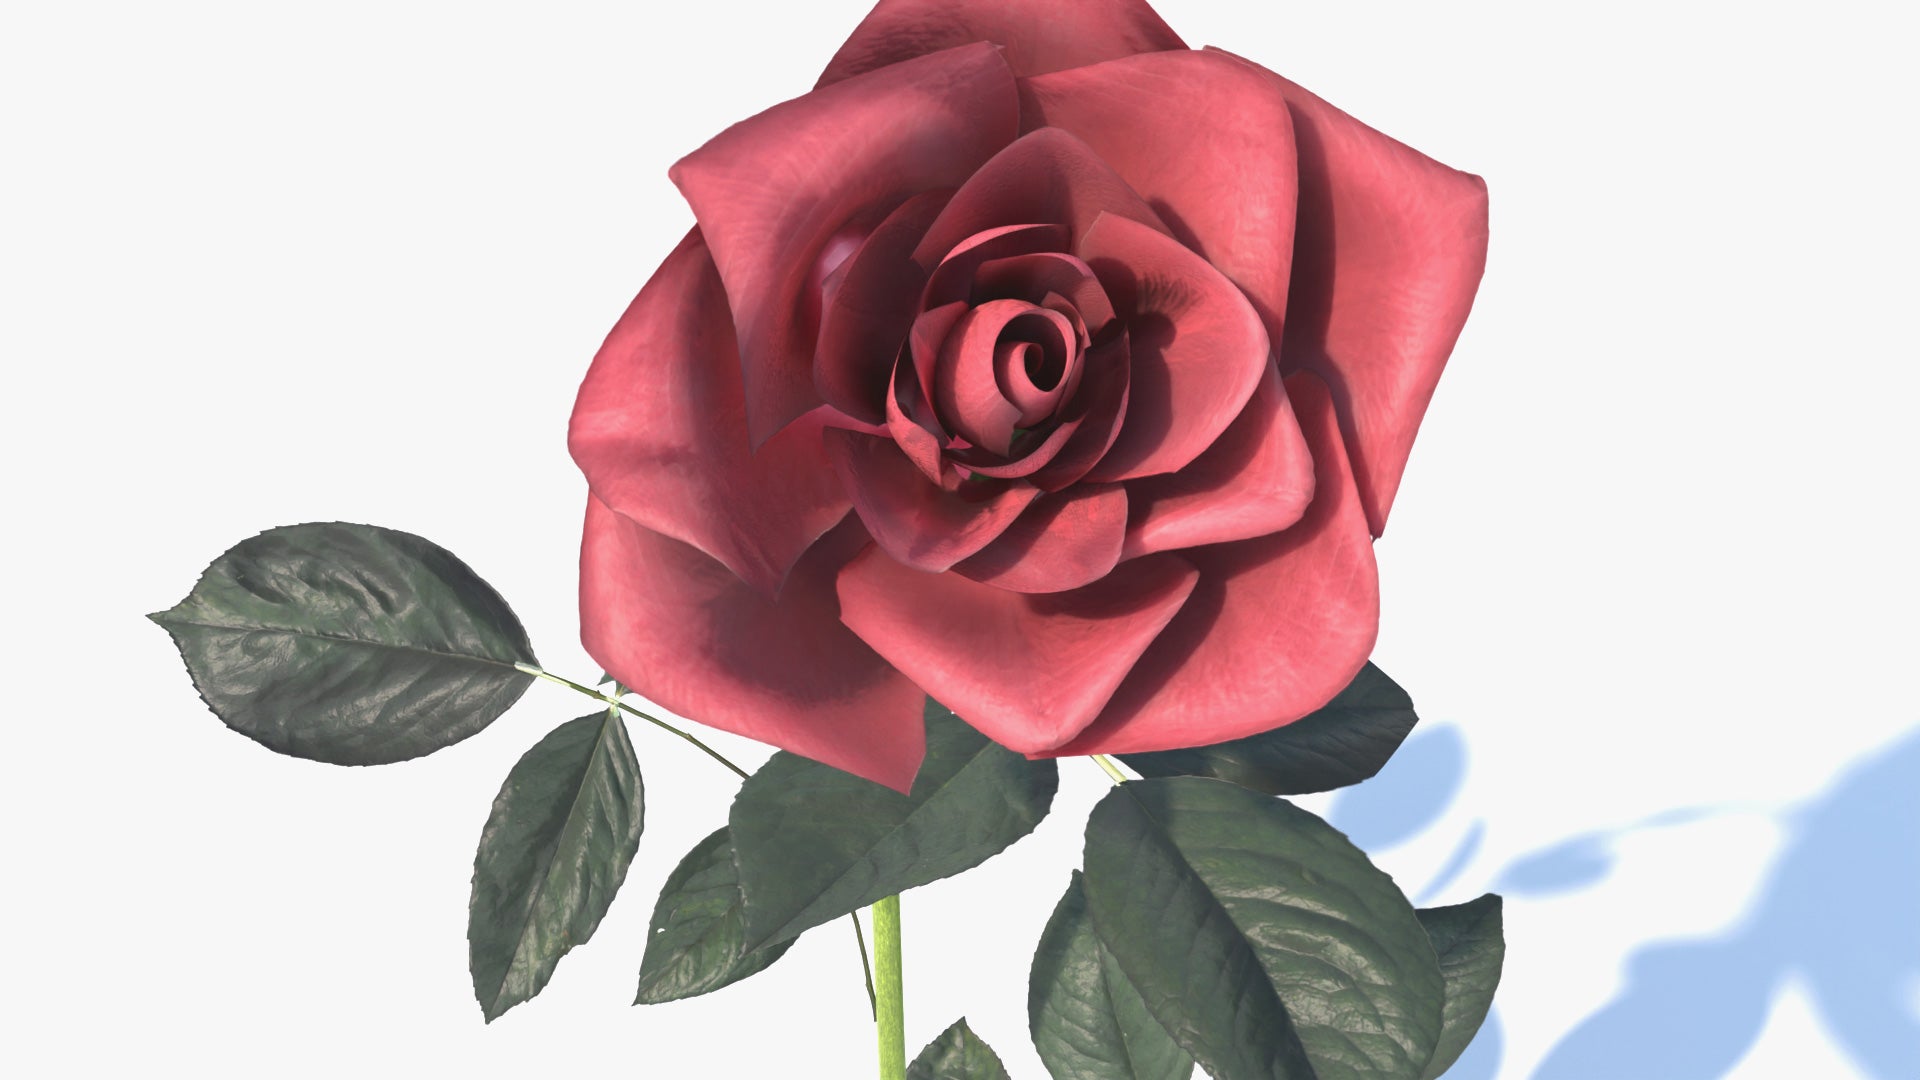 3d model of a rose made in Blender, with low polycount and PBR textures